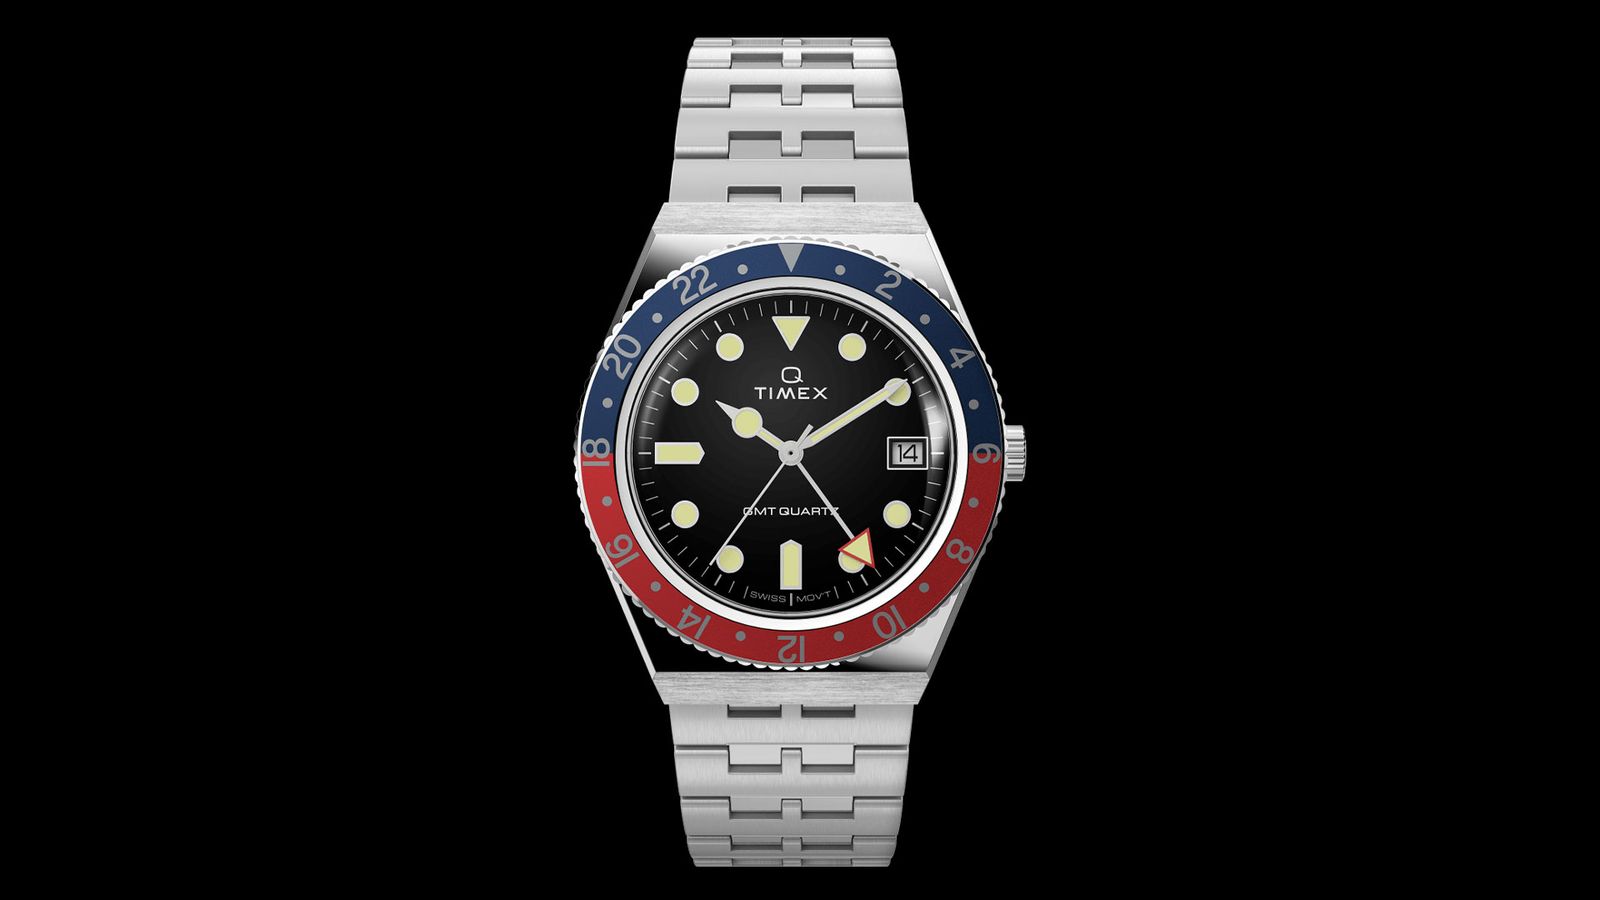 Q Timex GMT product image of a silver watch with a red and blue bezel.